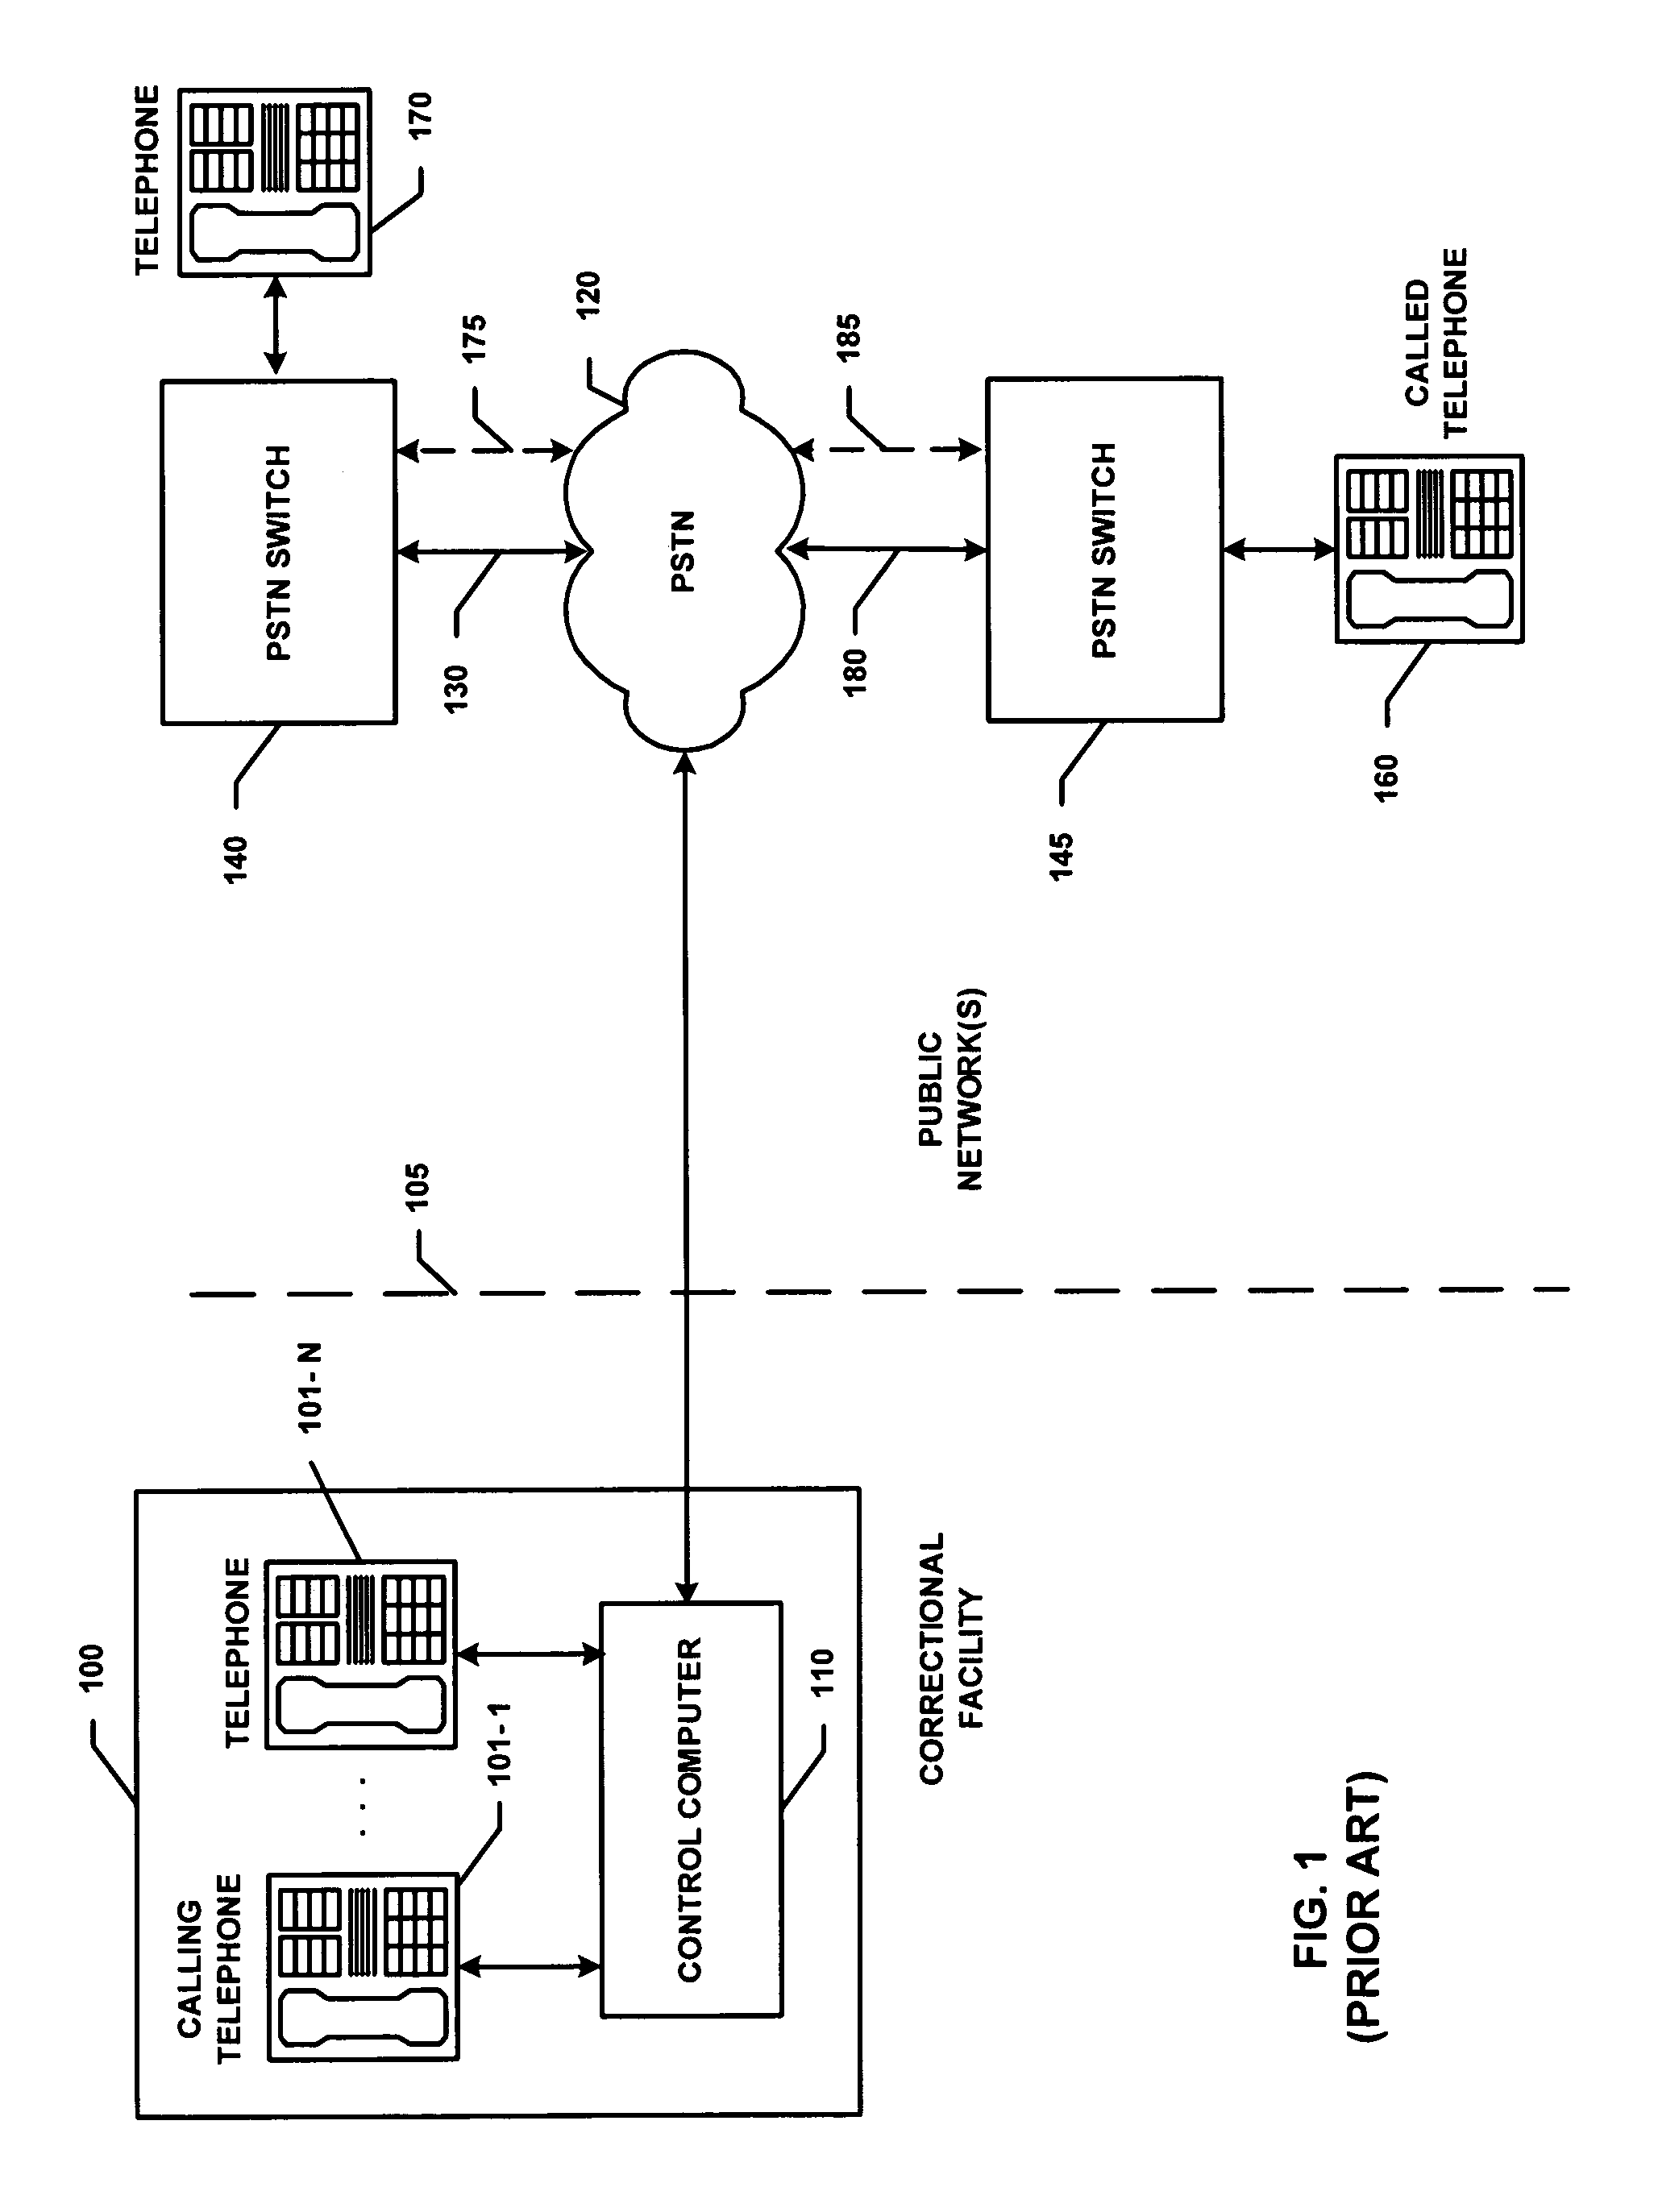 Telephony system and method with enhanced validation